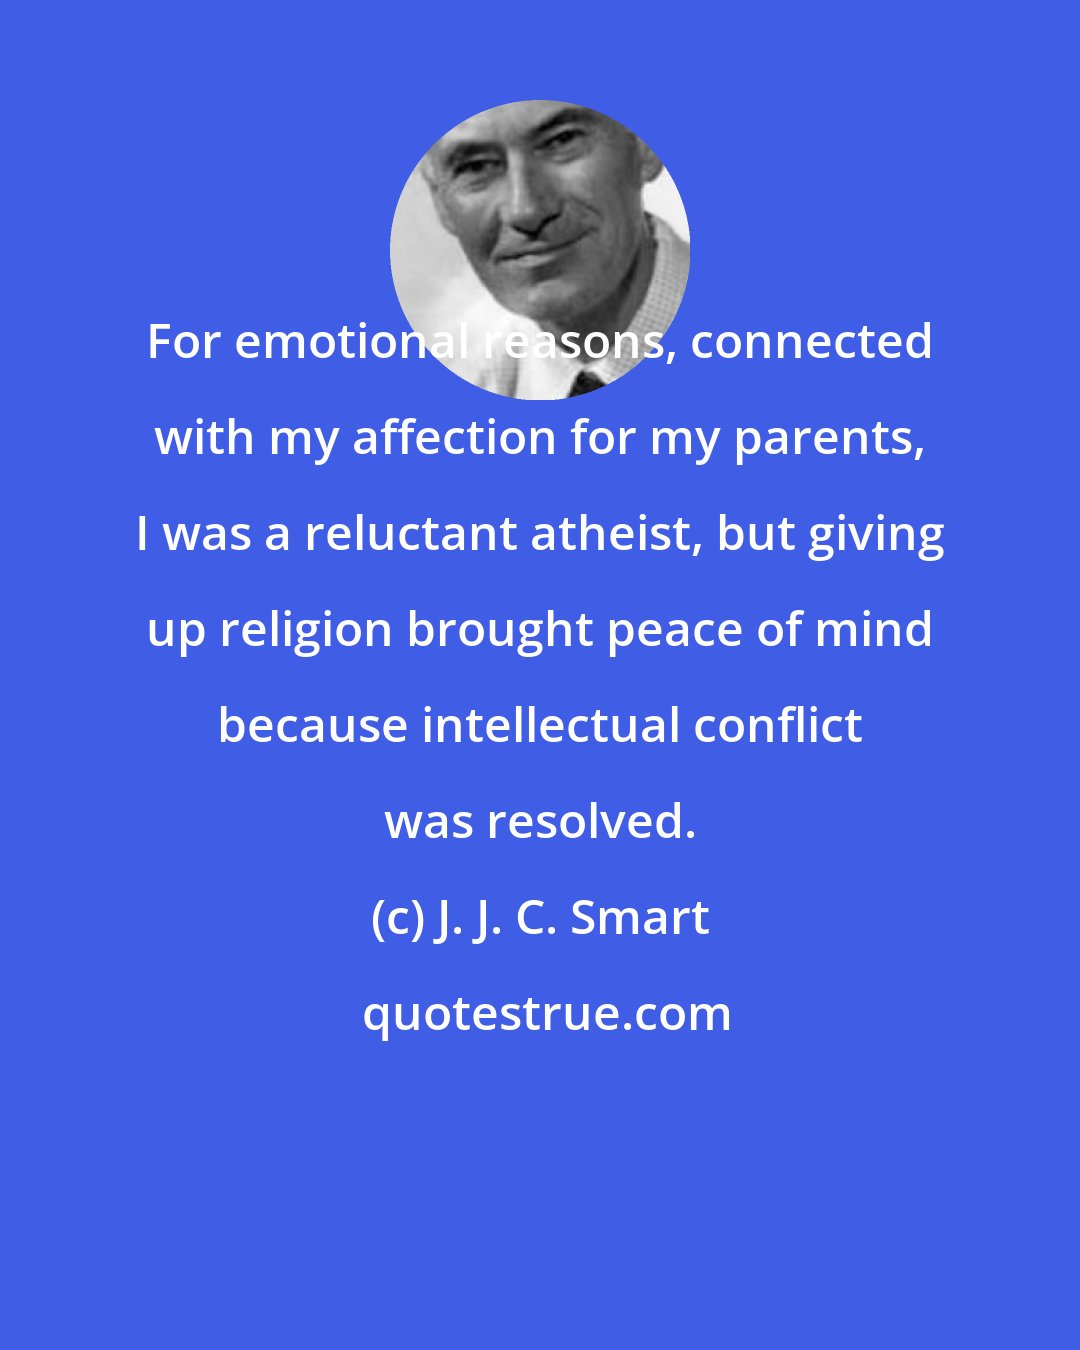 J. J. C. Smart: For emotional reasons, connected with my affection for my parents, I was a reluctant atheist, but giving up religion brought peace of mind because intellectual conflict was resolved.